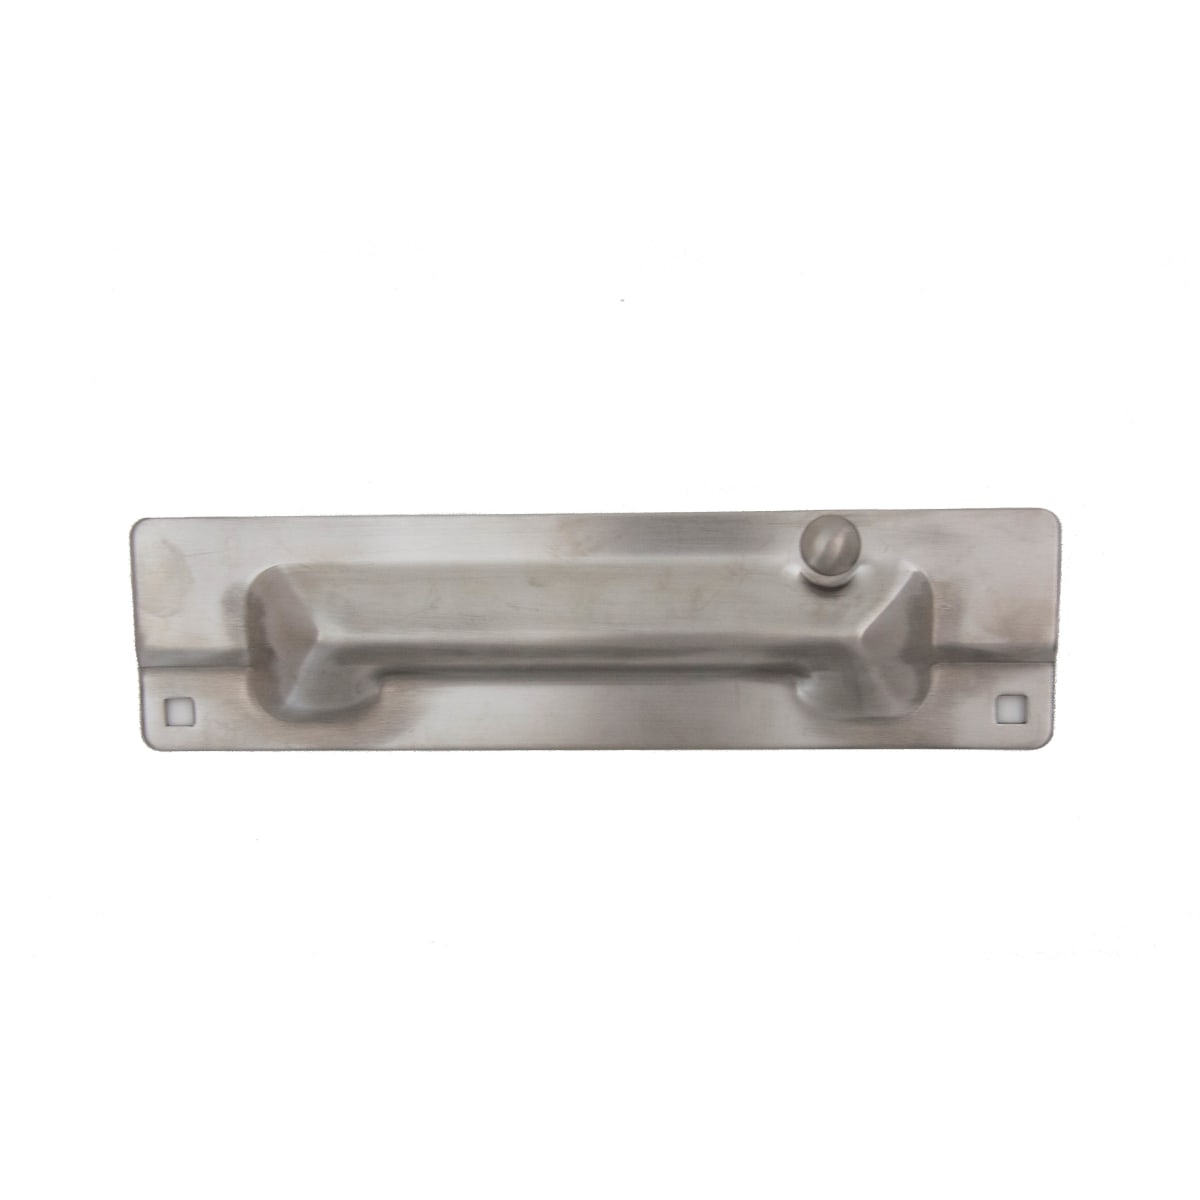 Ives Commercial 044074996425 Lock Guard with Security Frame Pin LG132D 